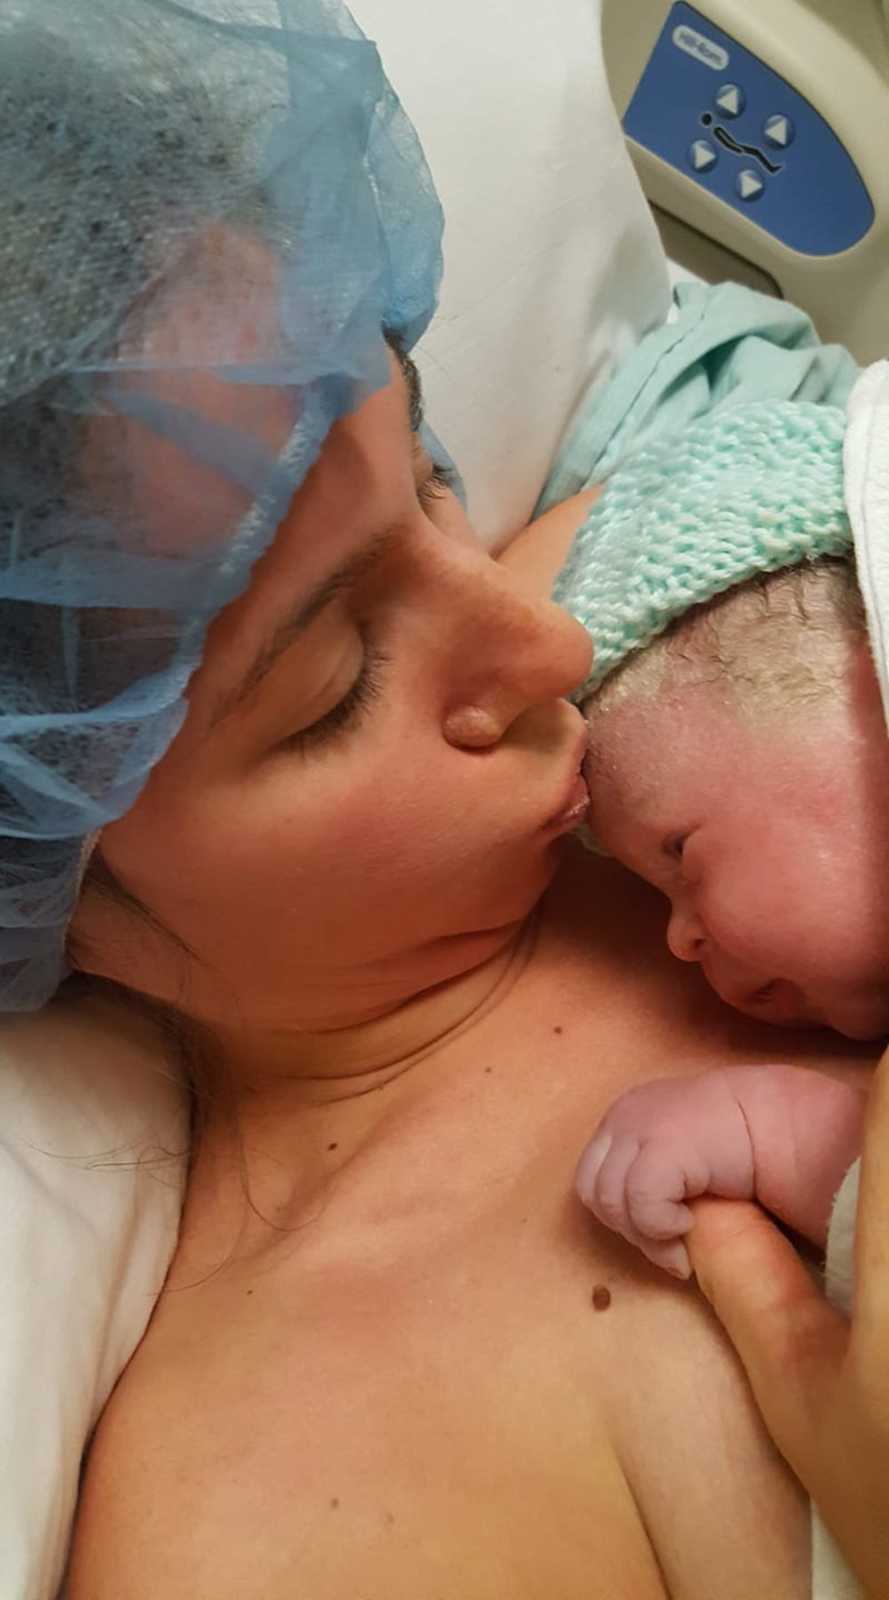 Mother who says time flies lays in hospital bed kissing forehead of newborn